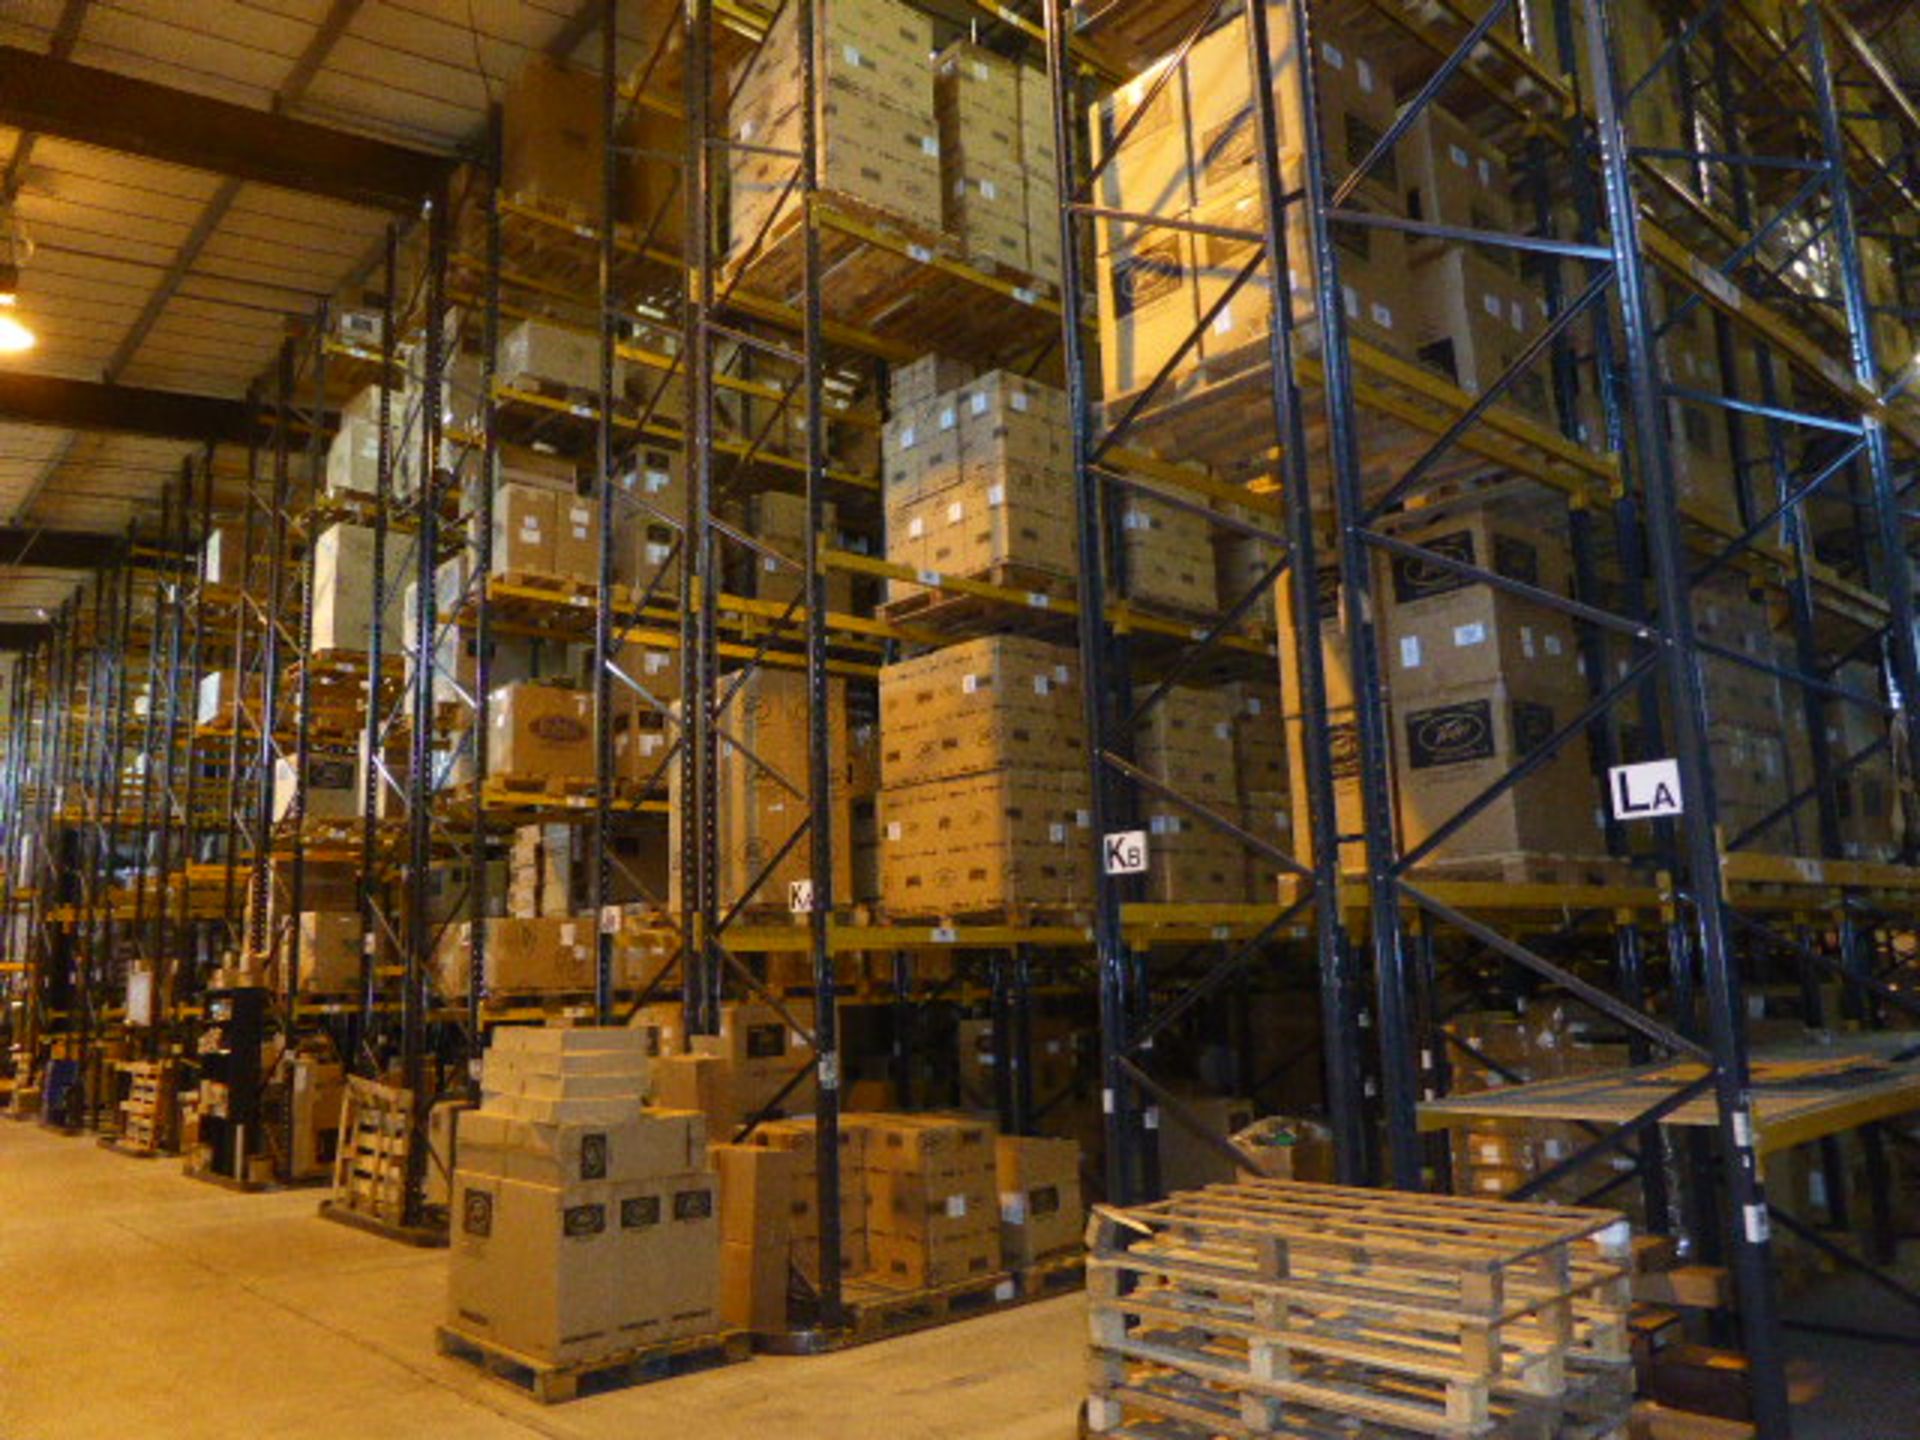 Link 51 model H pallet racking in the first warehouse in brown and yellow finish assembled in 20 - Image 2 of 9